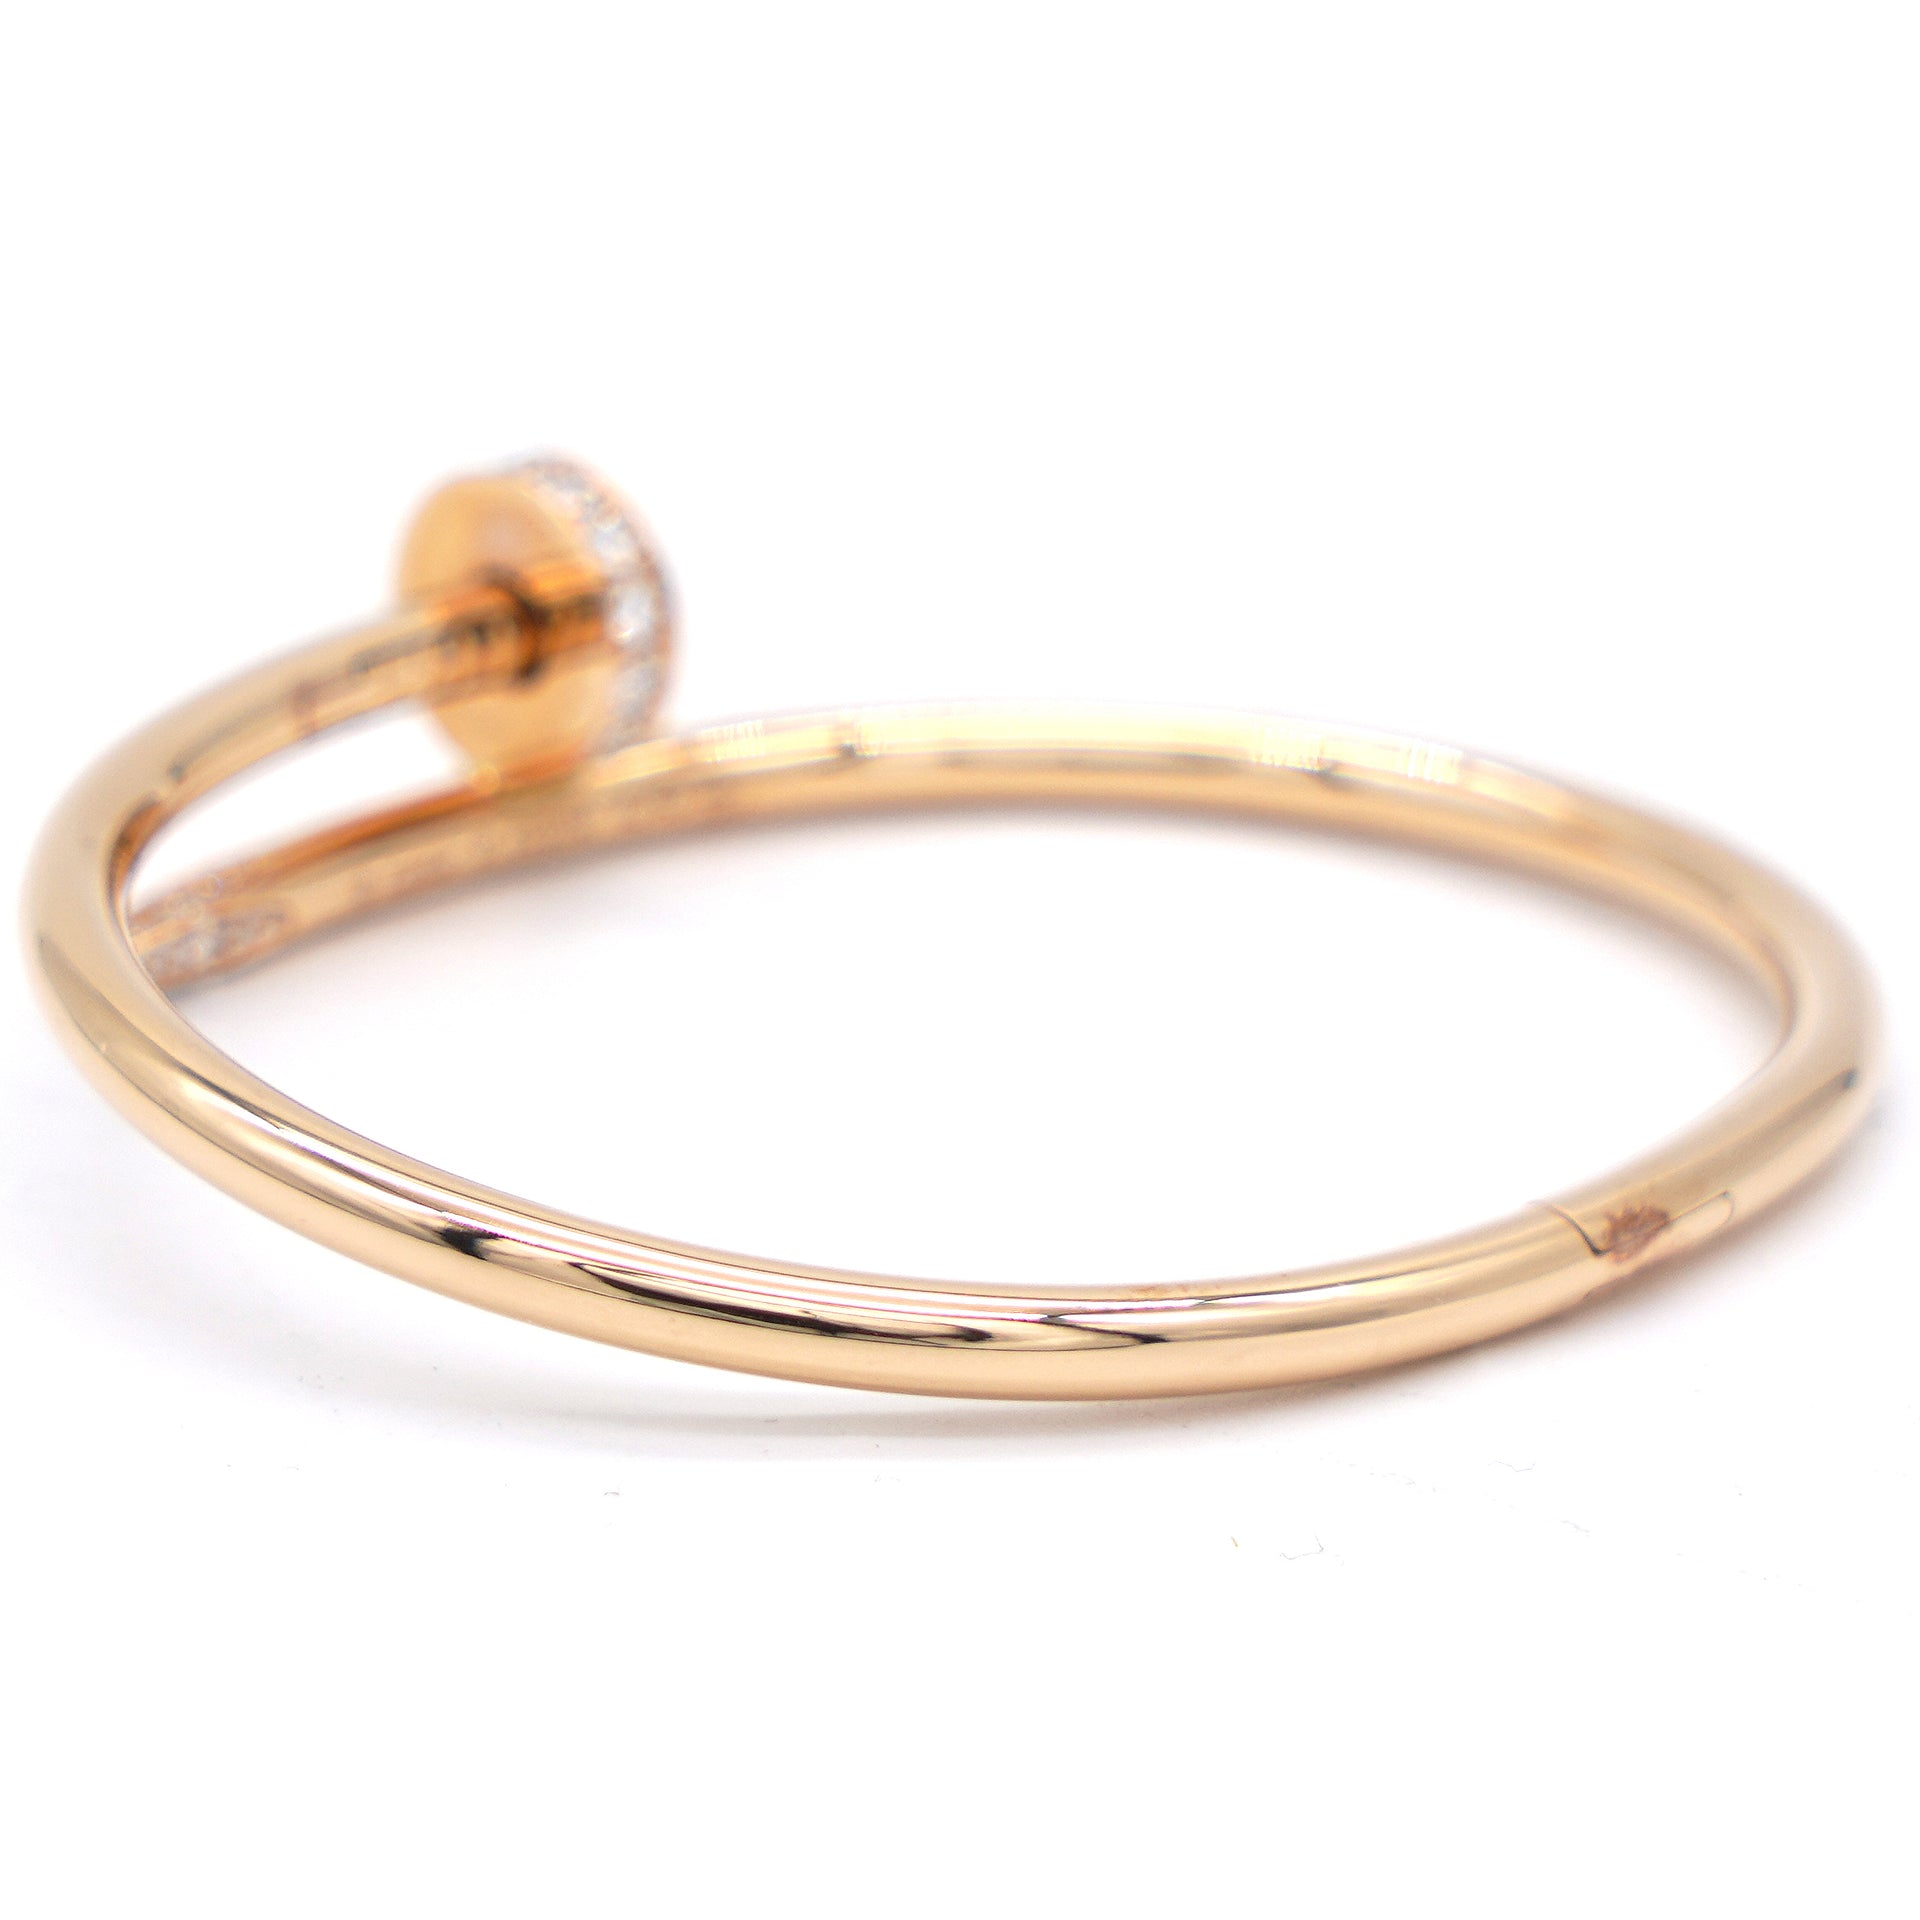 Cartier Openable Nail Bangle Best Price In Pakistan | Rs 1700 | find the  best quality of Jewelry,jewellery , Bracelets, Rings, Neck Less, Earrings,  Hairpin, Hand Cuff, Pendant, Bangles at Wishlistpk.com